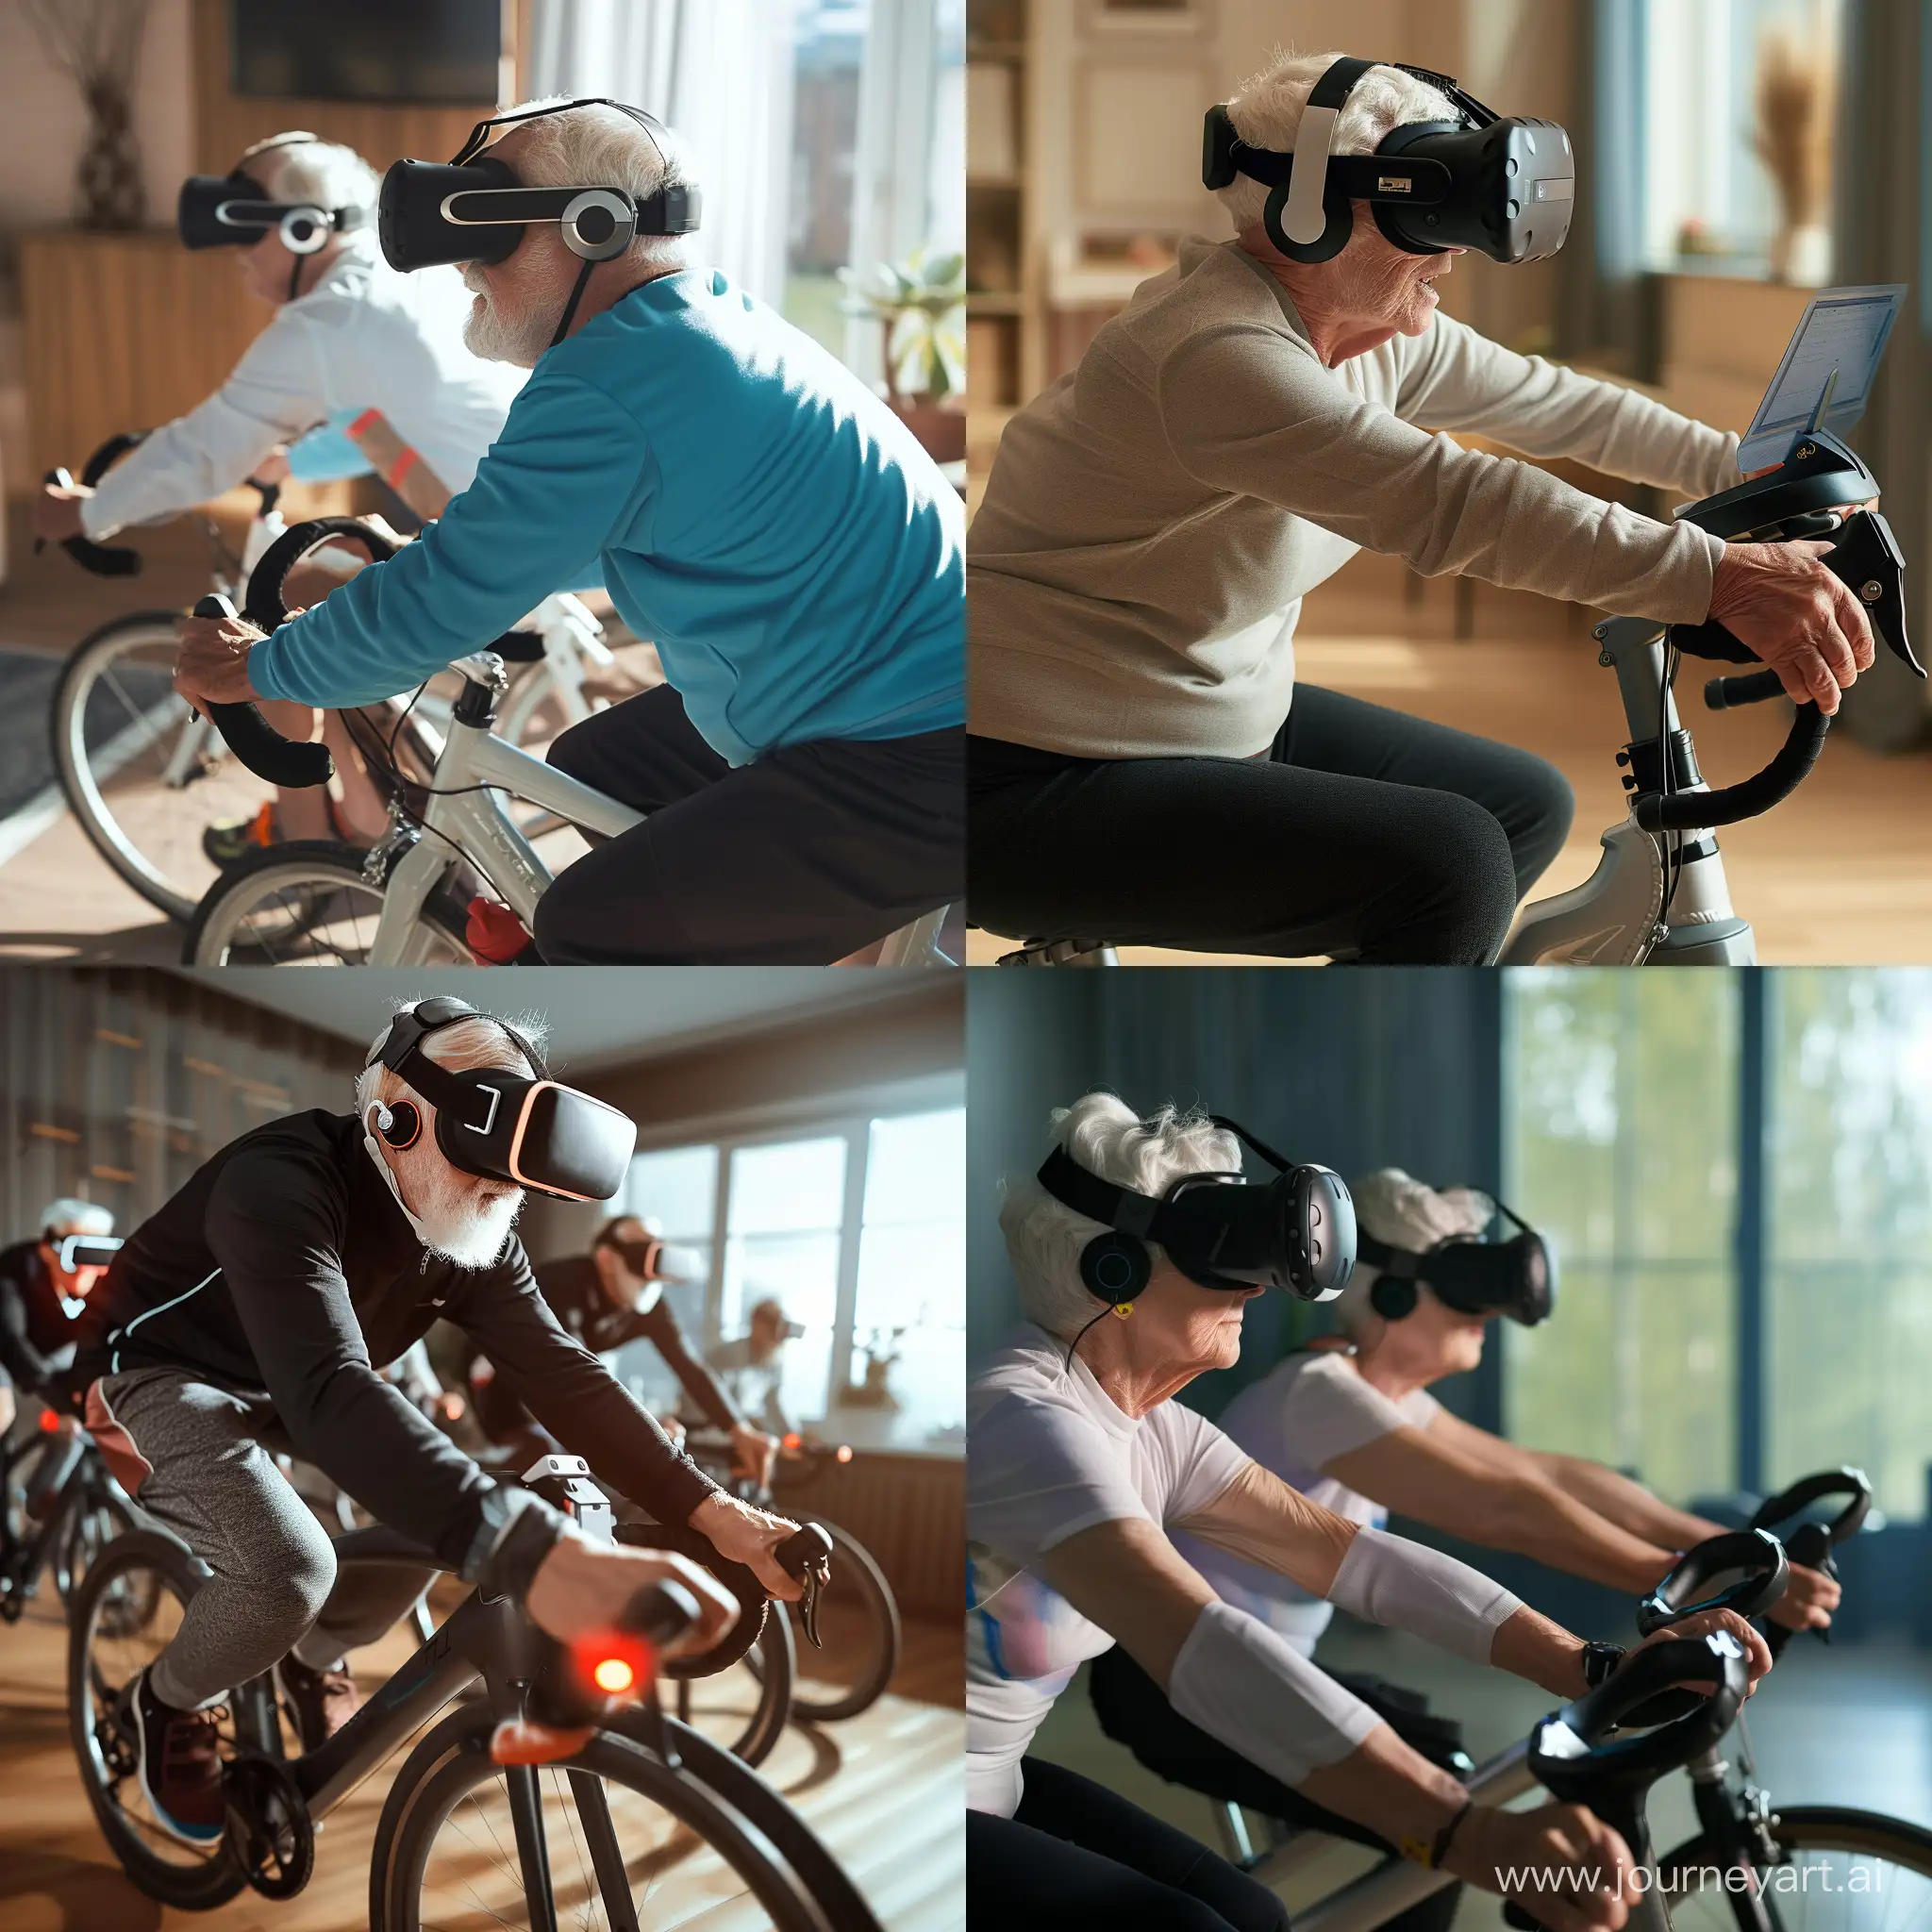 Elderly-Gamers-Engage-in-Virtual-Reality-Cycling-Adventure